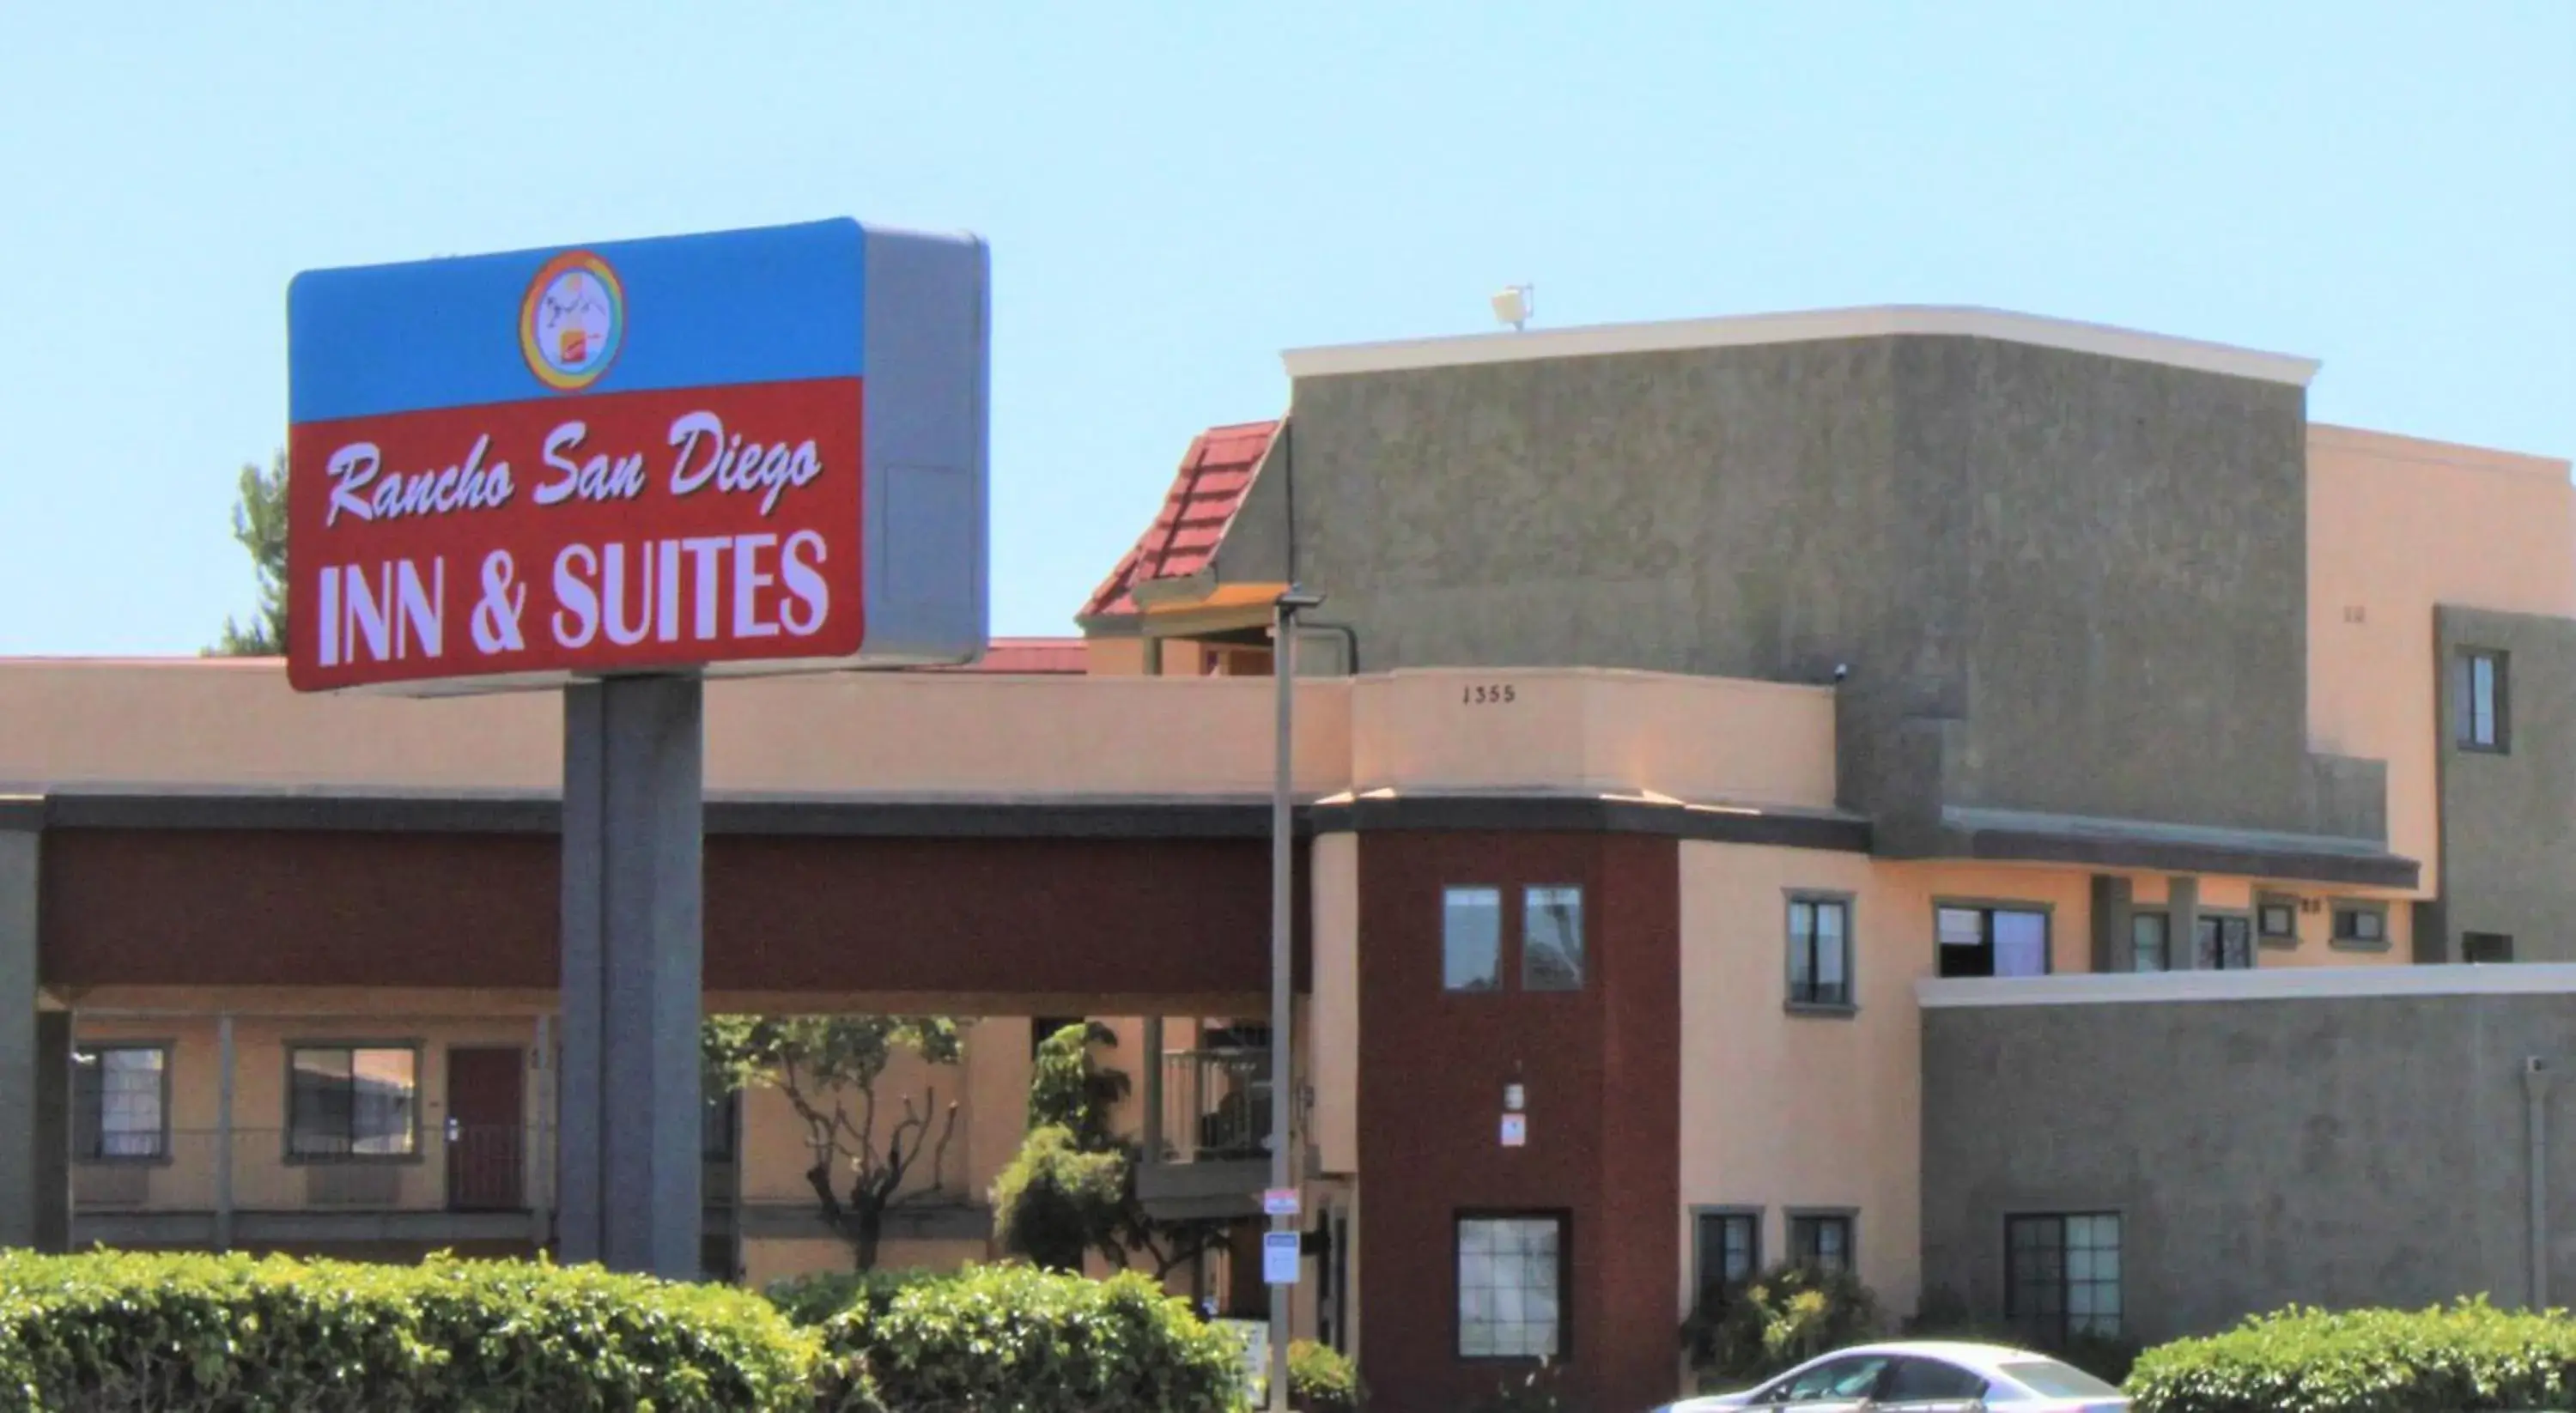 Property Building in Rancho San Diego Inn & Suites